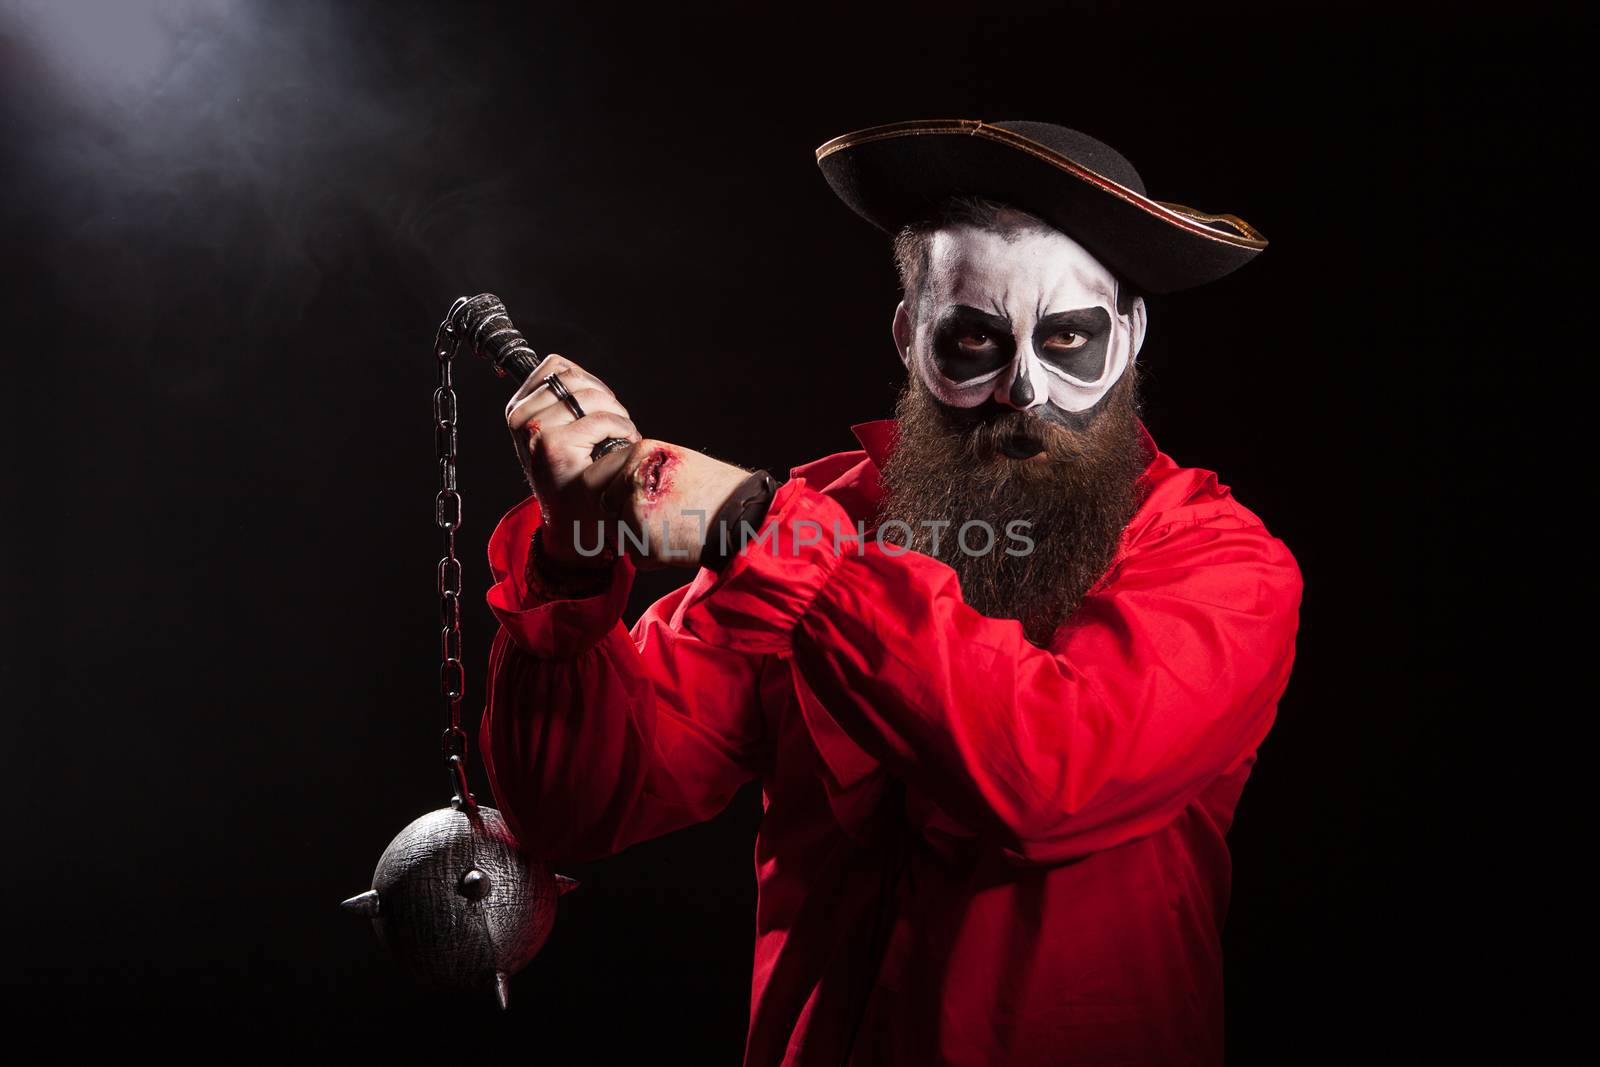 Spooky male pirate with long beard holding a mace over black background. Halloween outfit.